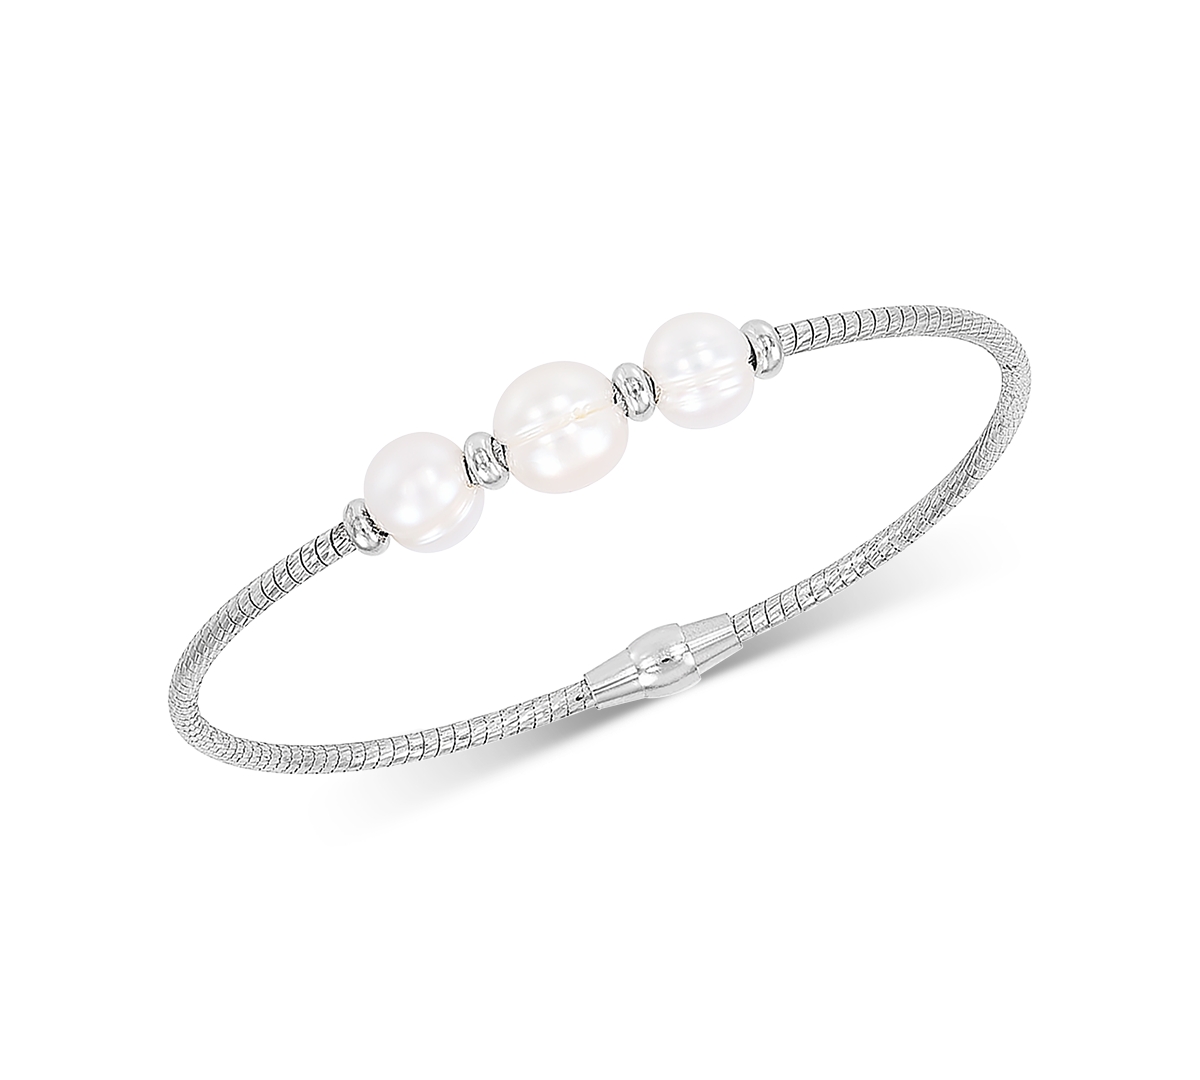 Cultured Freshwater Pearl (7-9mm) Bangle Bracelet in Sterling Silver - Silver